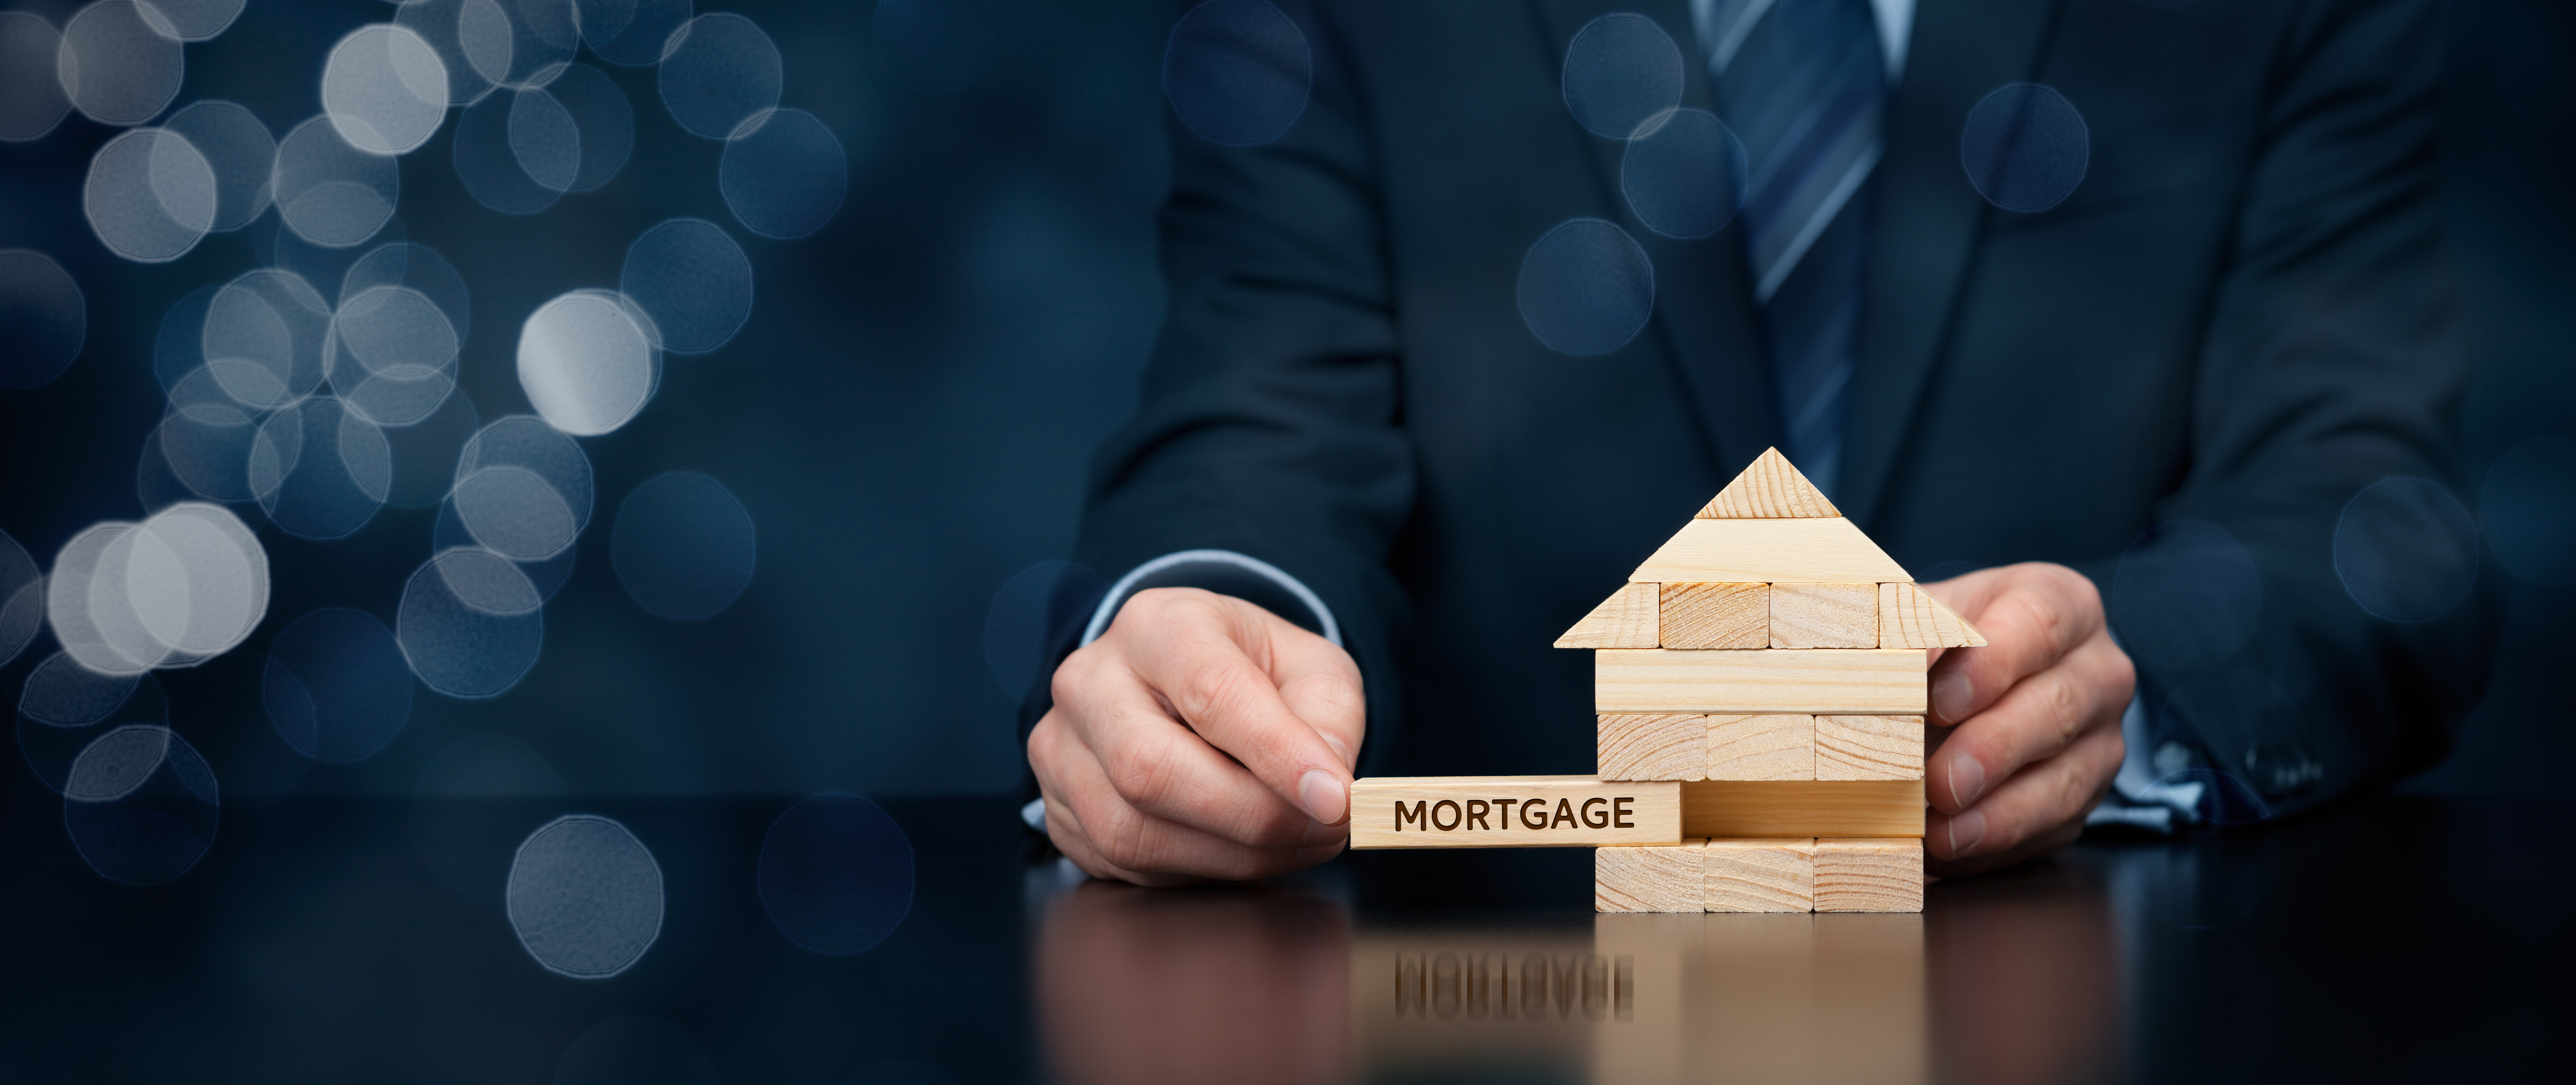 Home Financing 101: What You Need to Know About Mortgage Loans